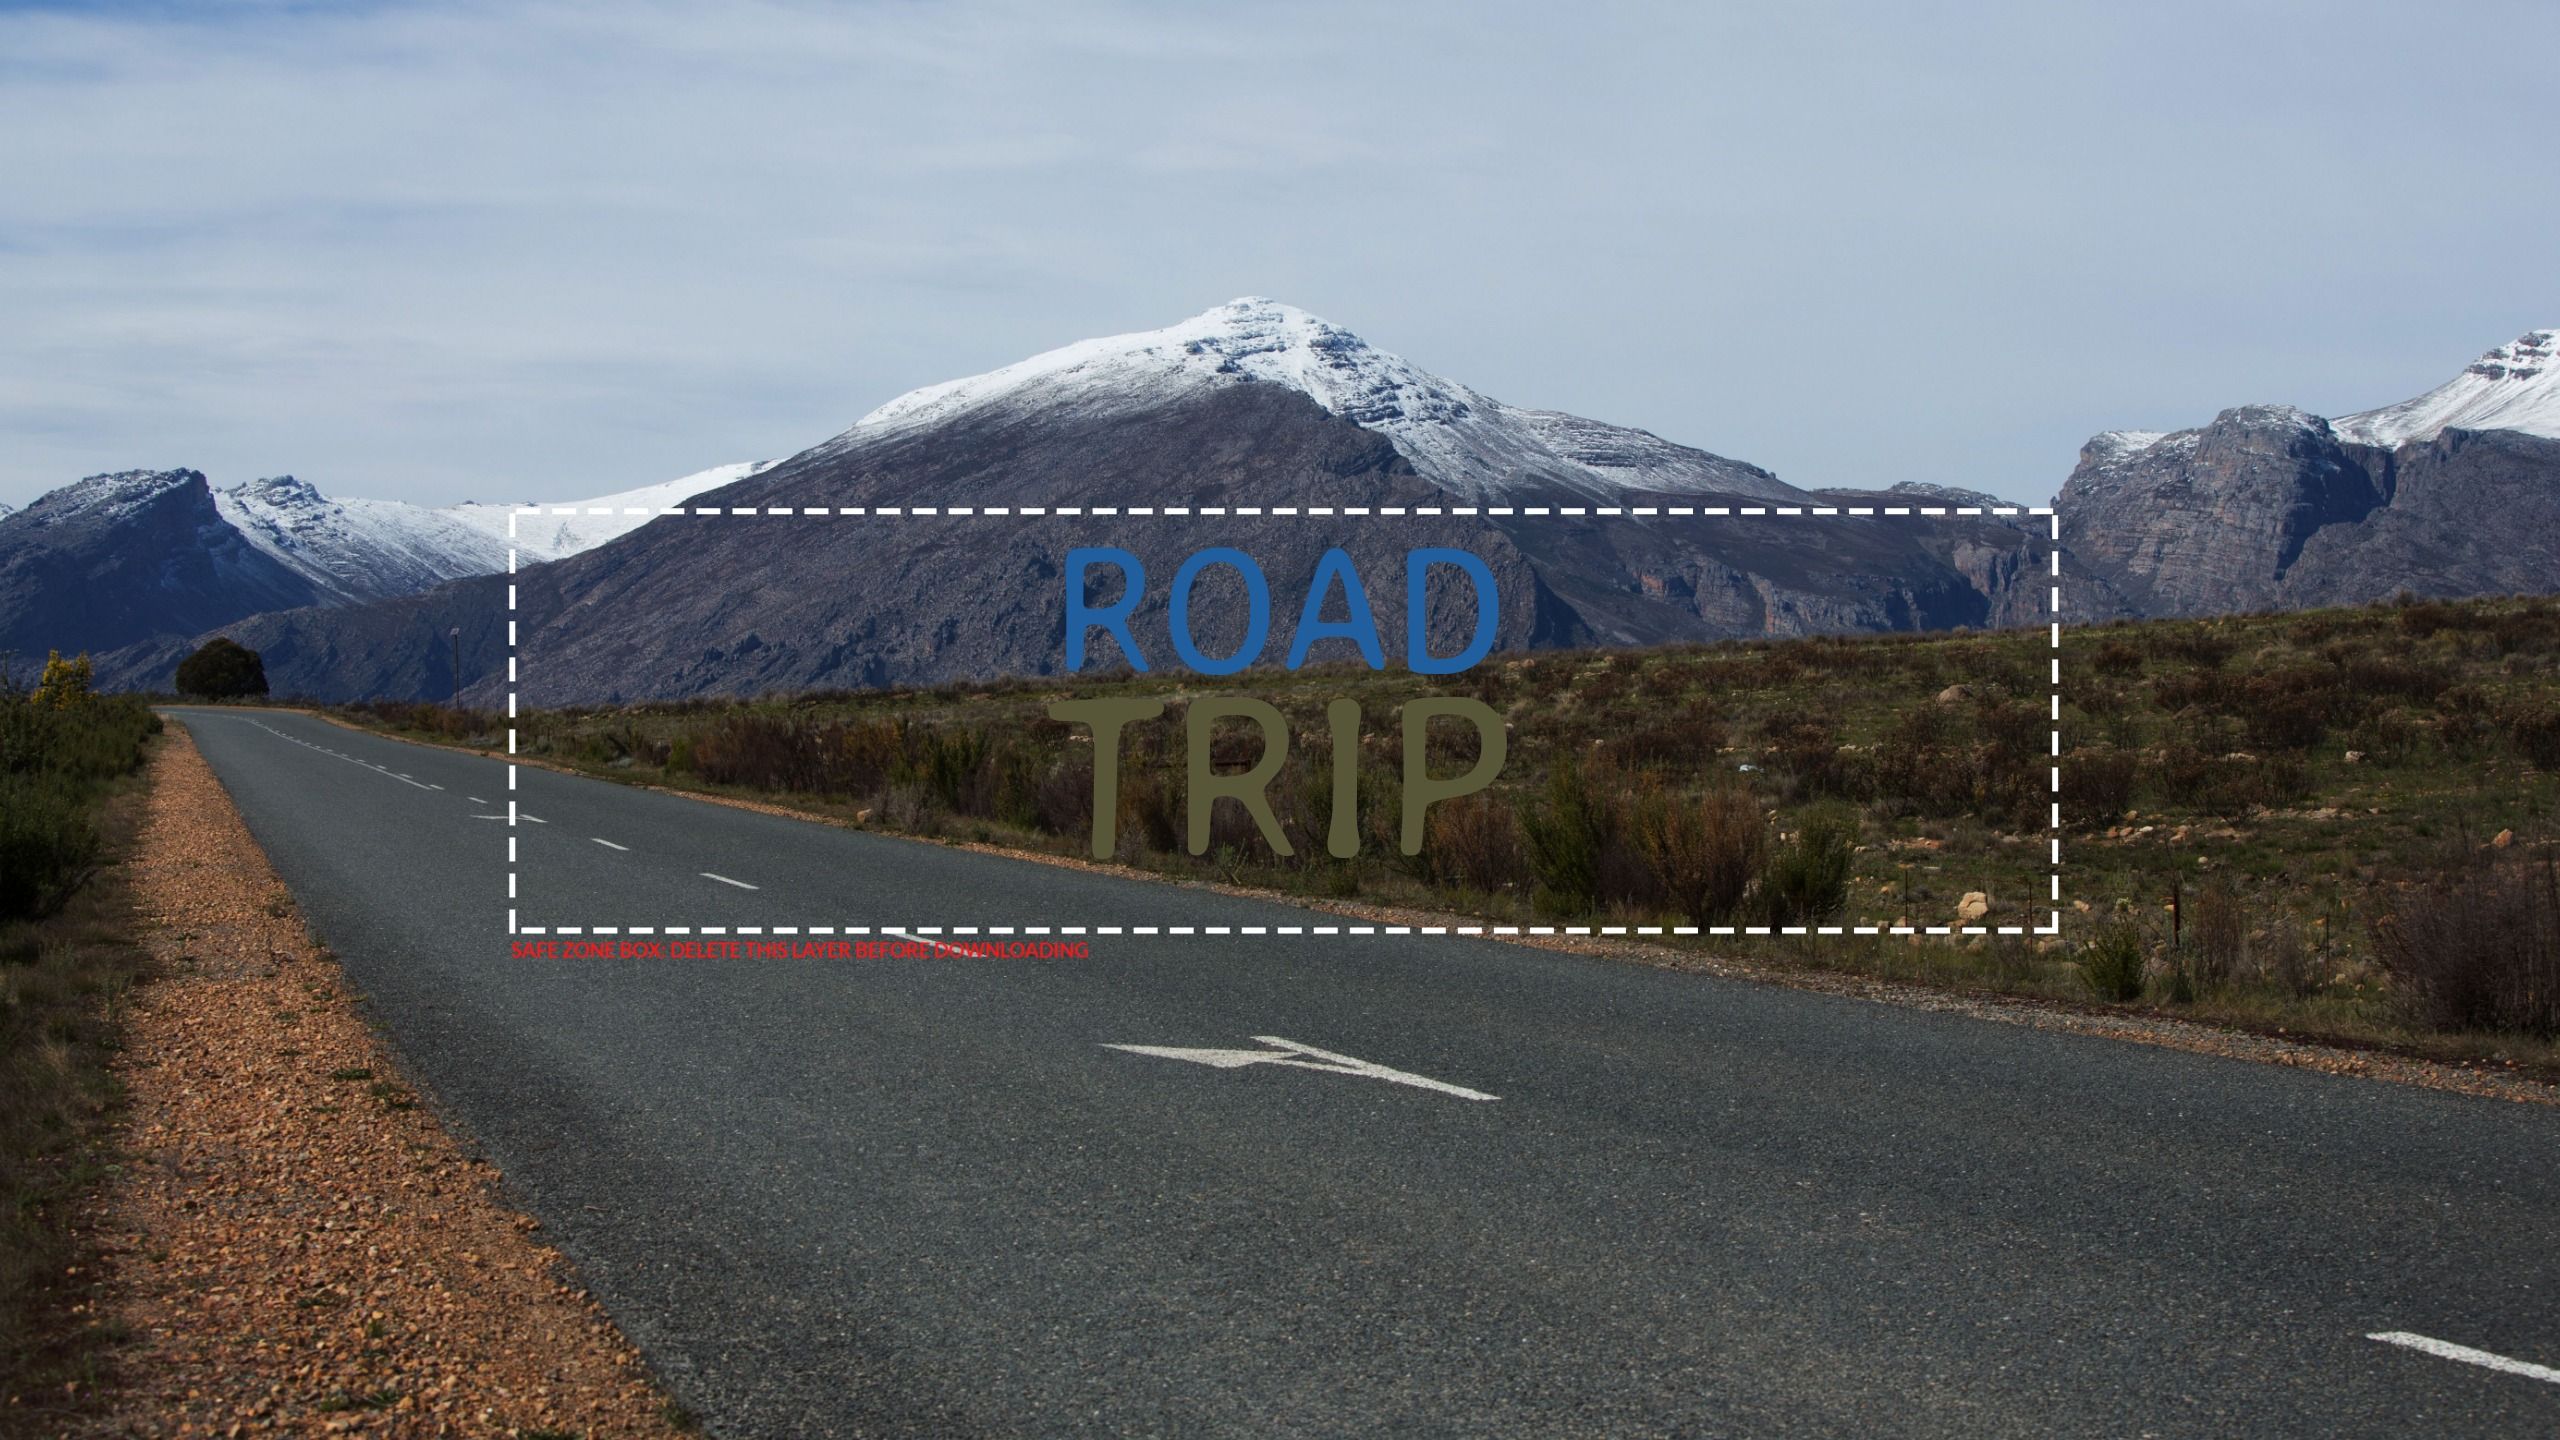 Road trip image background - Creative background ideas for inspiration - Image